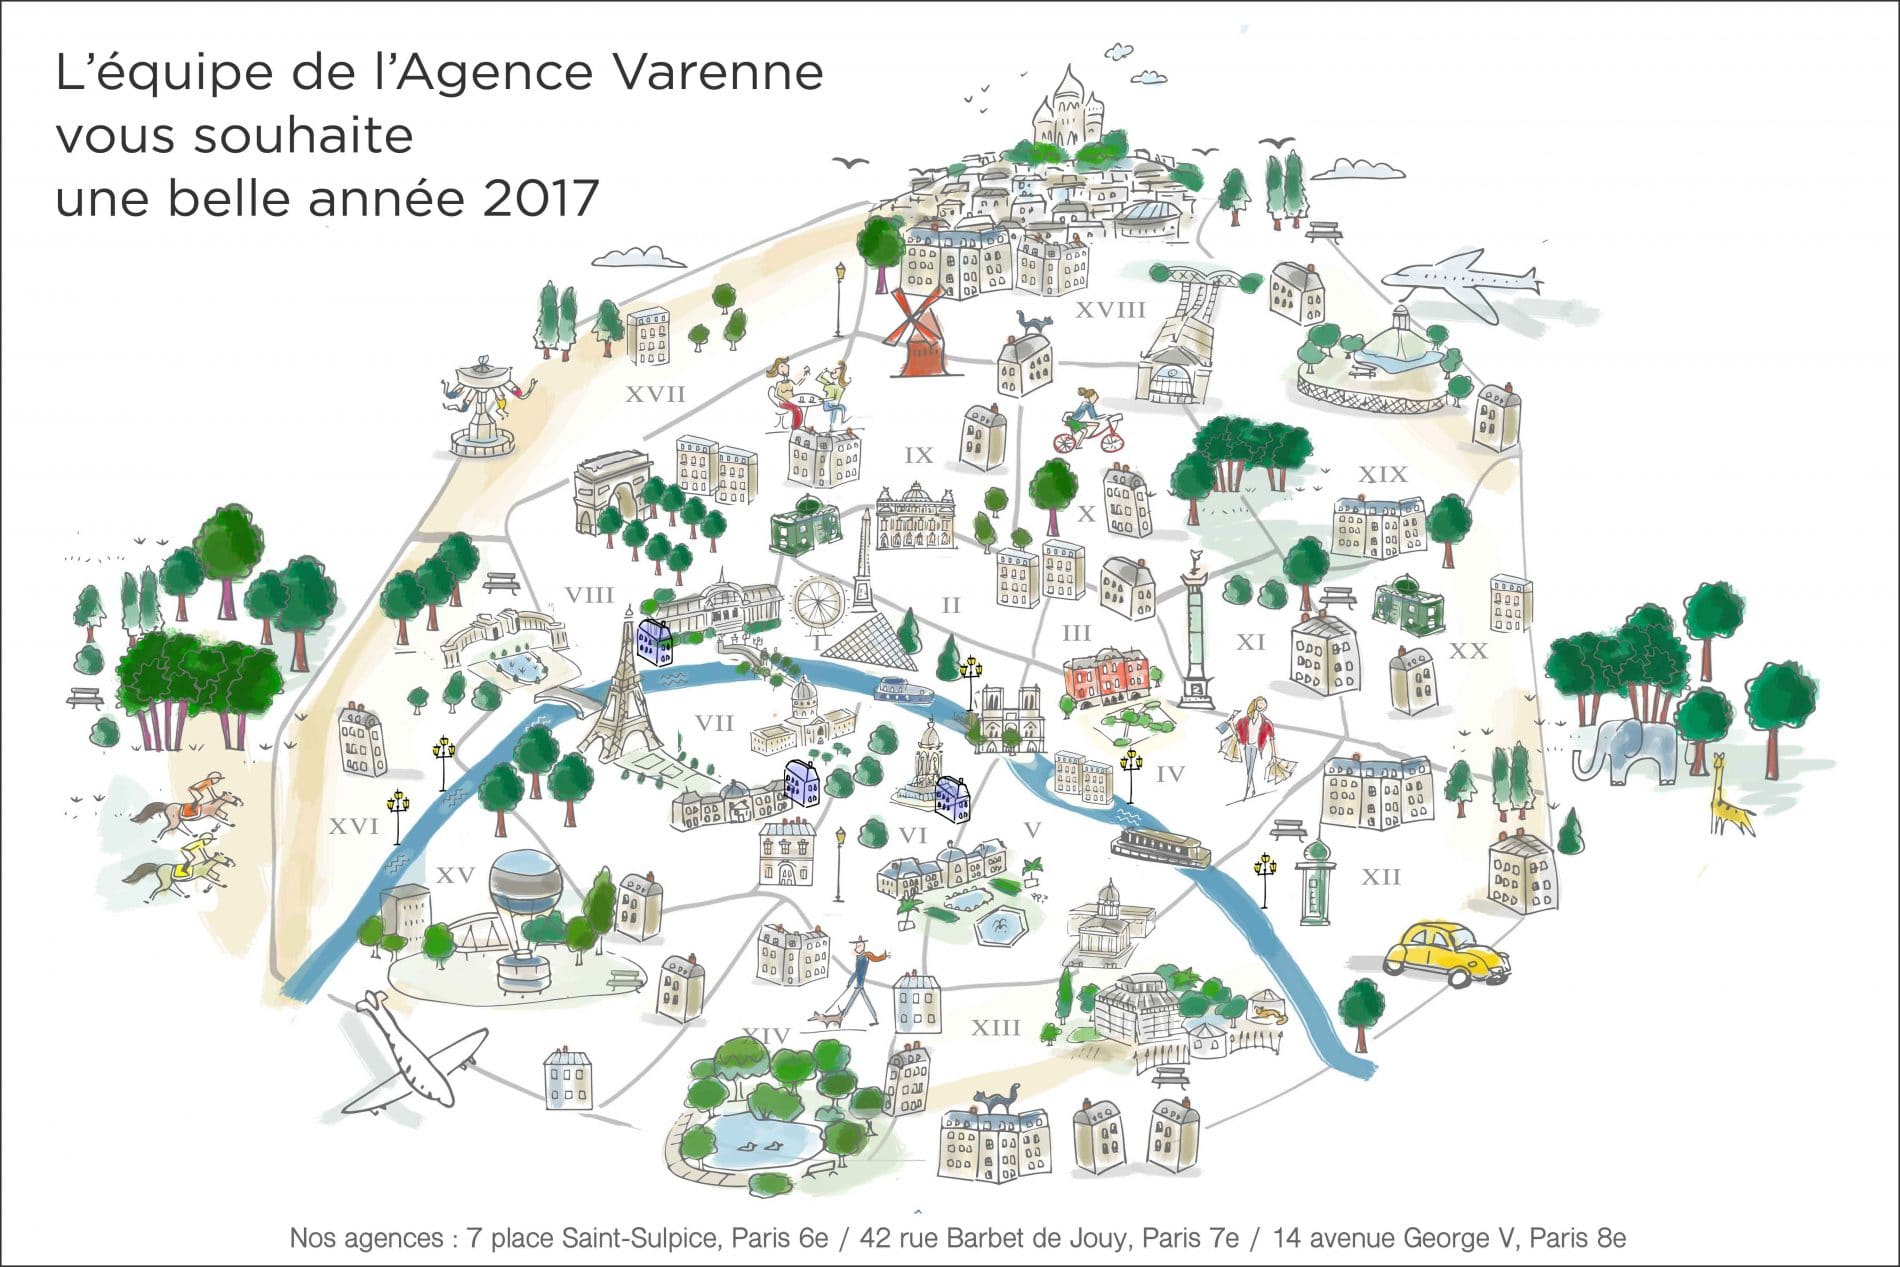 The Agence Varenne wishes you a beautiful year 2017